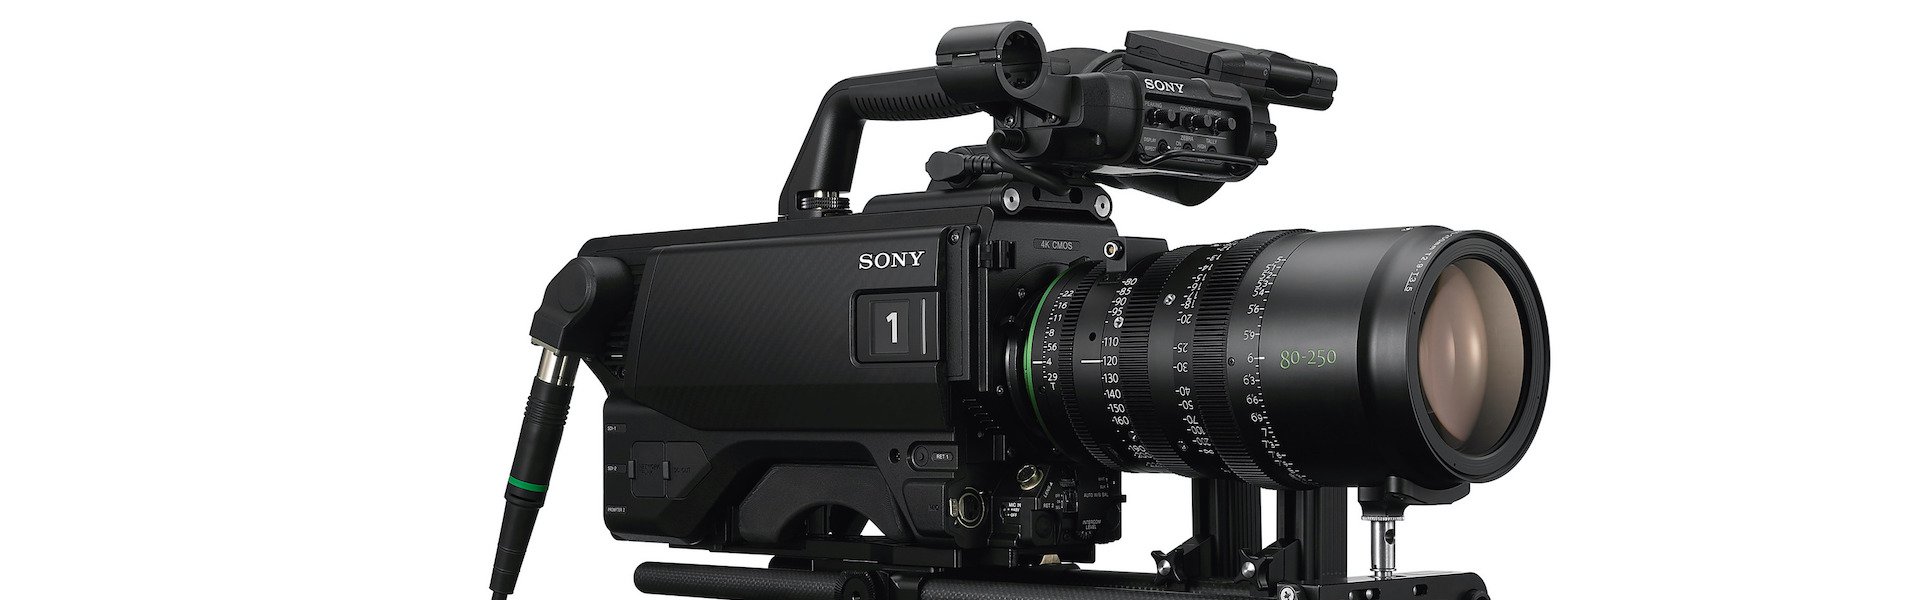 FOX, CBS and ESPN Deploy Sony Electronics' New HDC-F5500 Super 35mm 4K  Camera System for the Capture of Live Sporting Events - Sony Pro